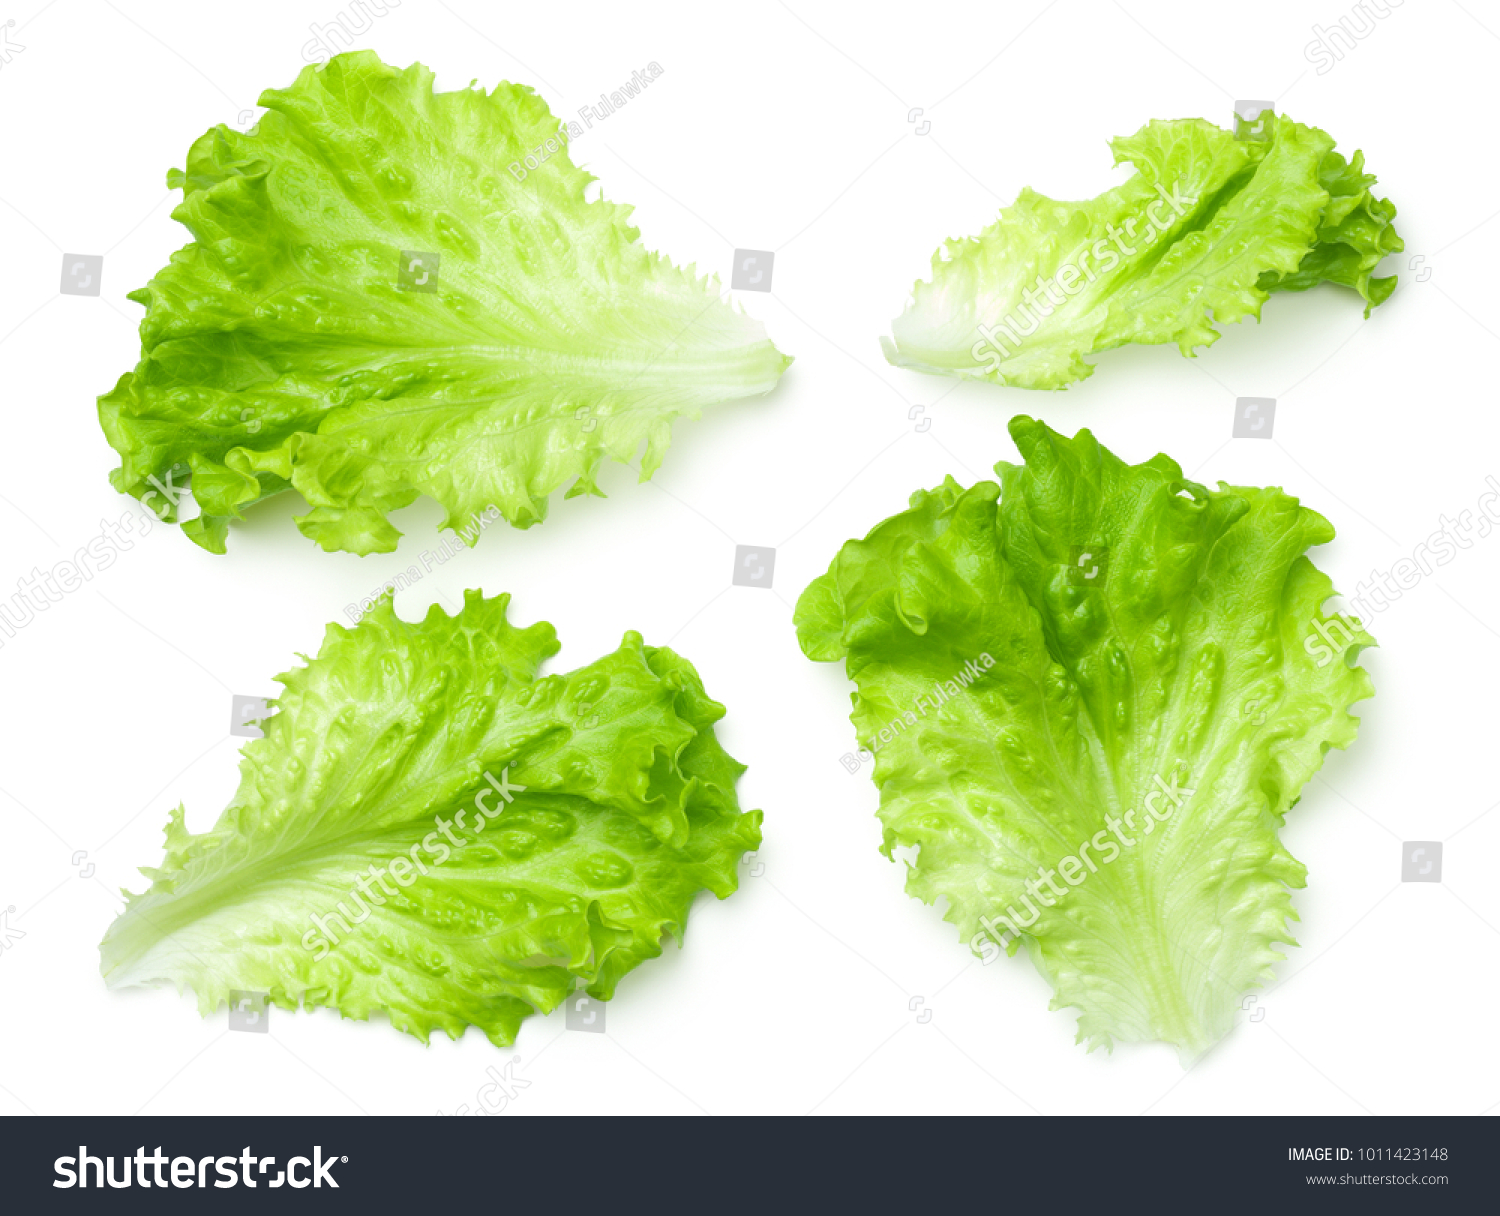 Lettuce leaves isolated on white background. Batavia salad. Top view  #1011423148